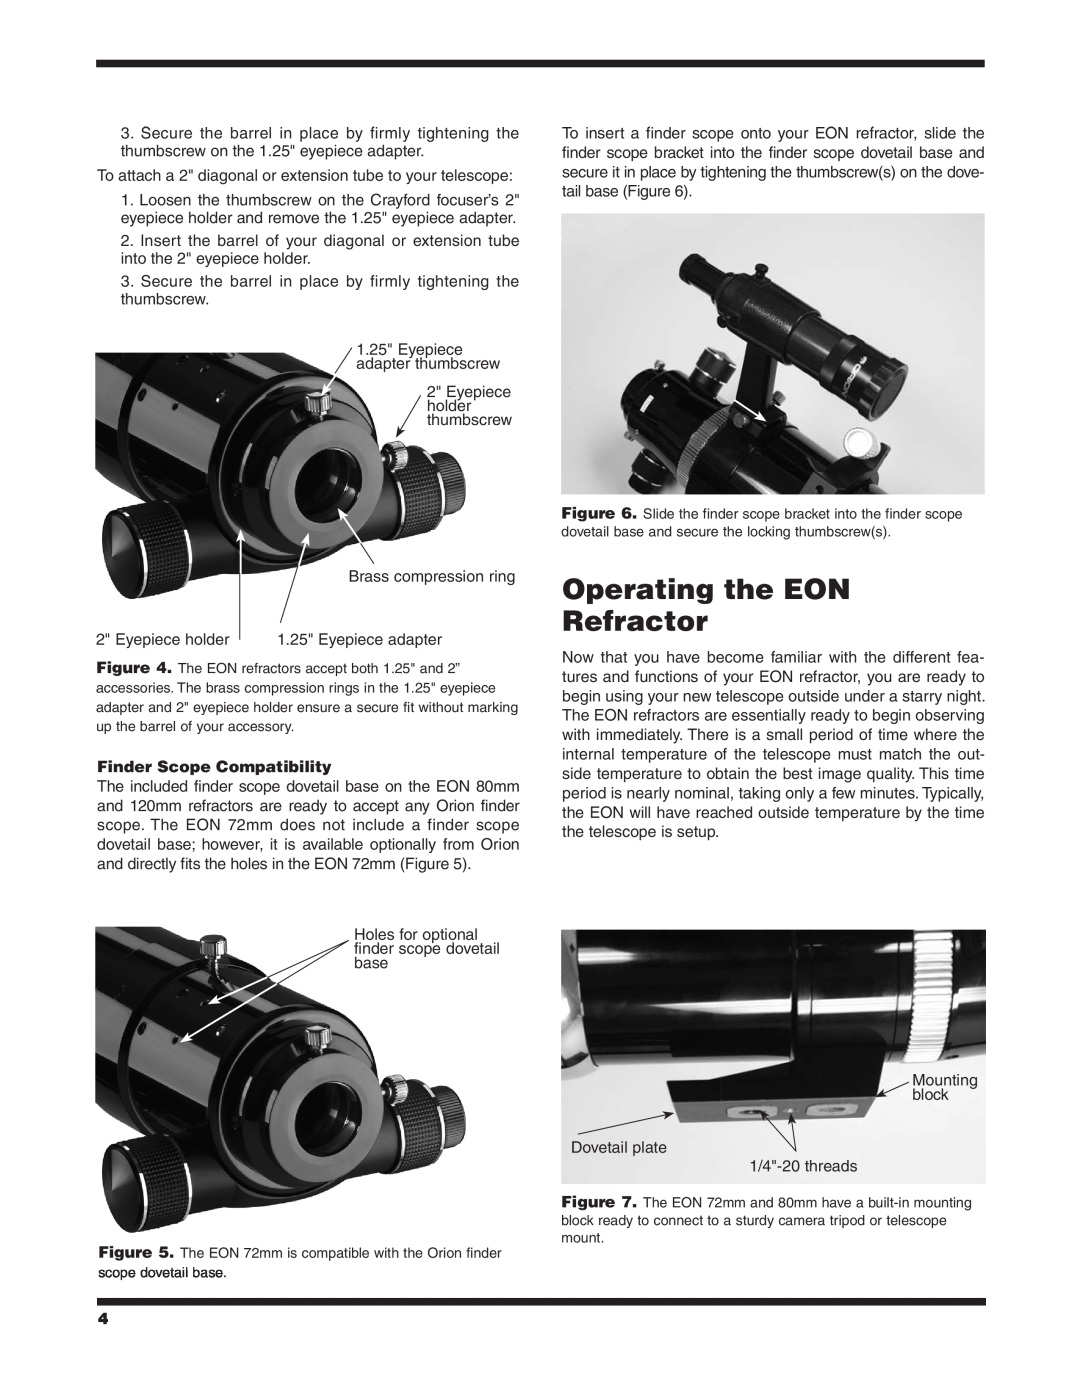 Orion #9781 EON 72MM instruction manual Operating the EON Refractor, Finder Scope Compatibility 